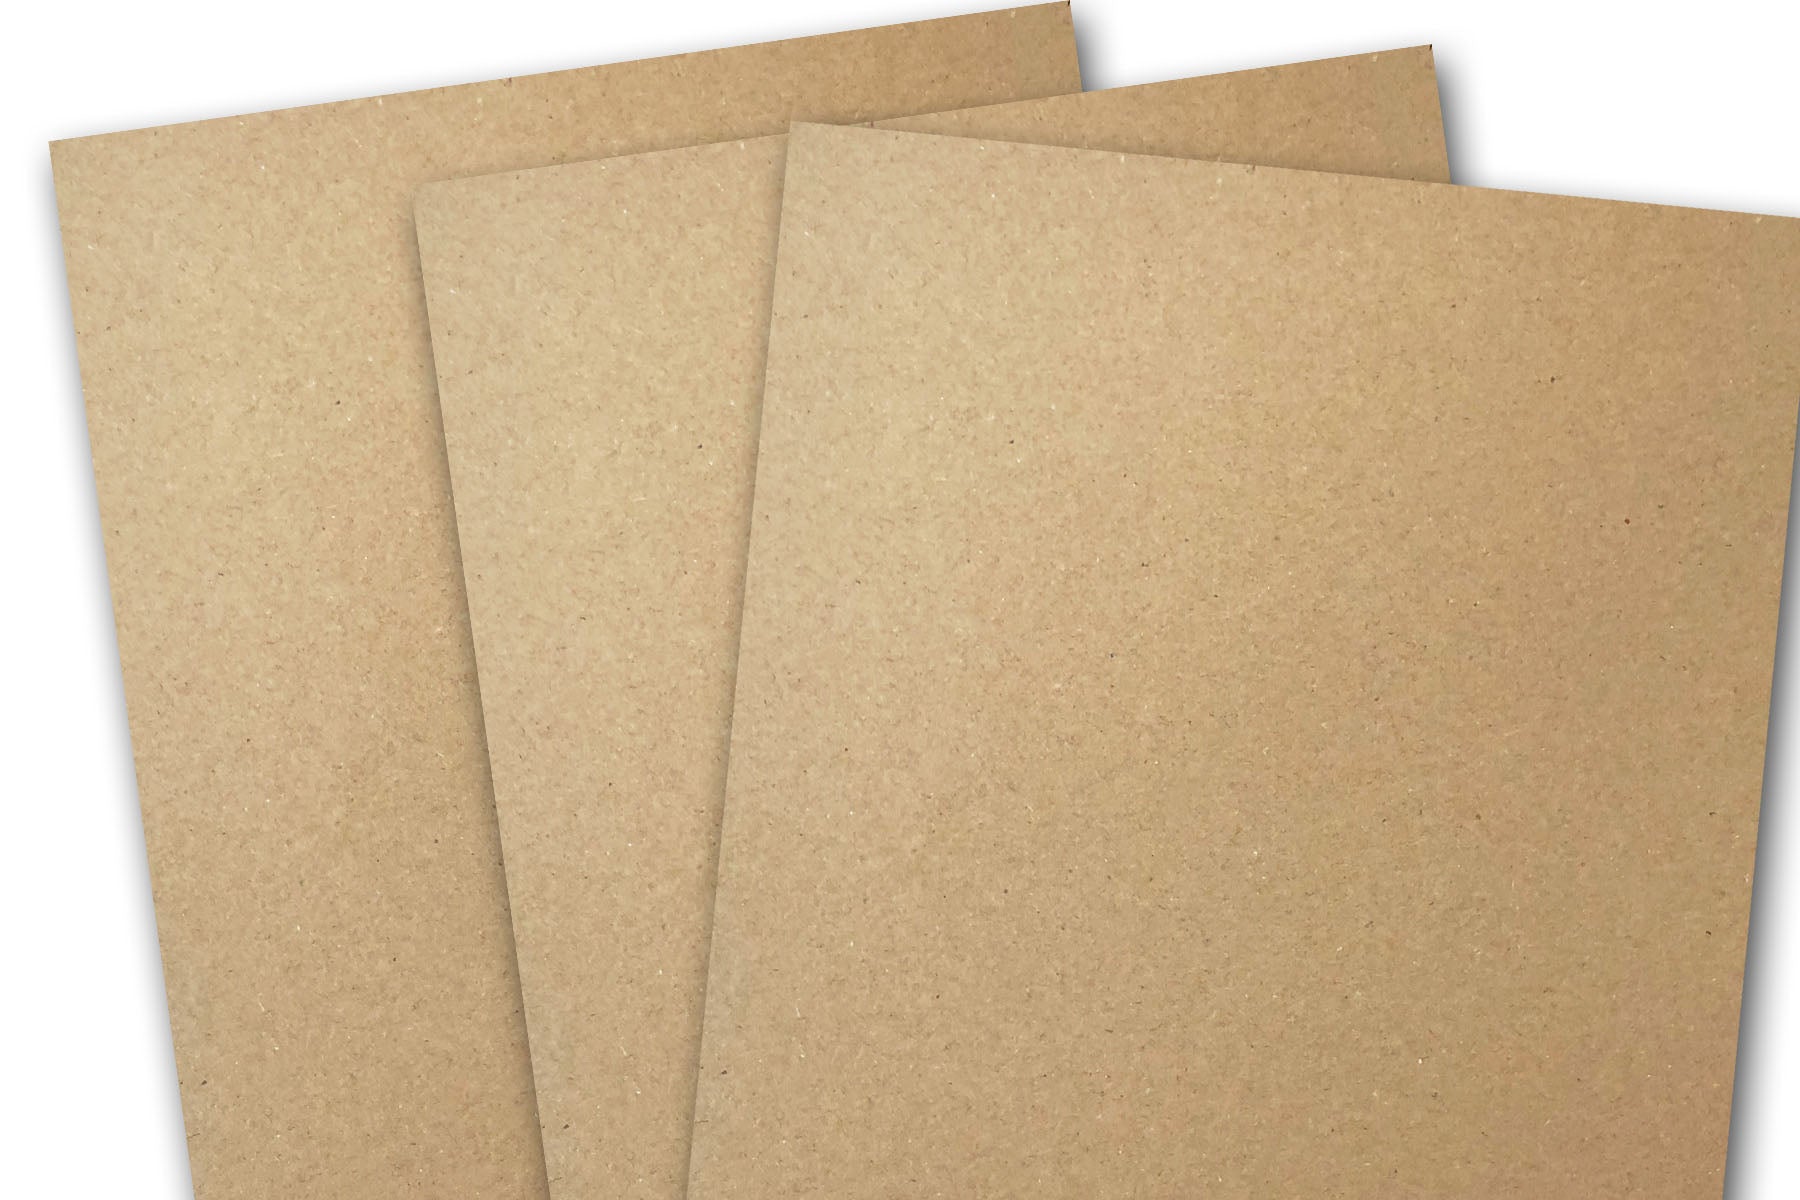 Brown Craft Paper A4 Kraft Paper 350gsm Thick Cardstock Paper